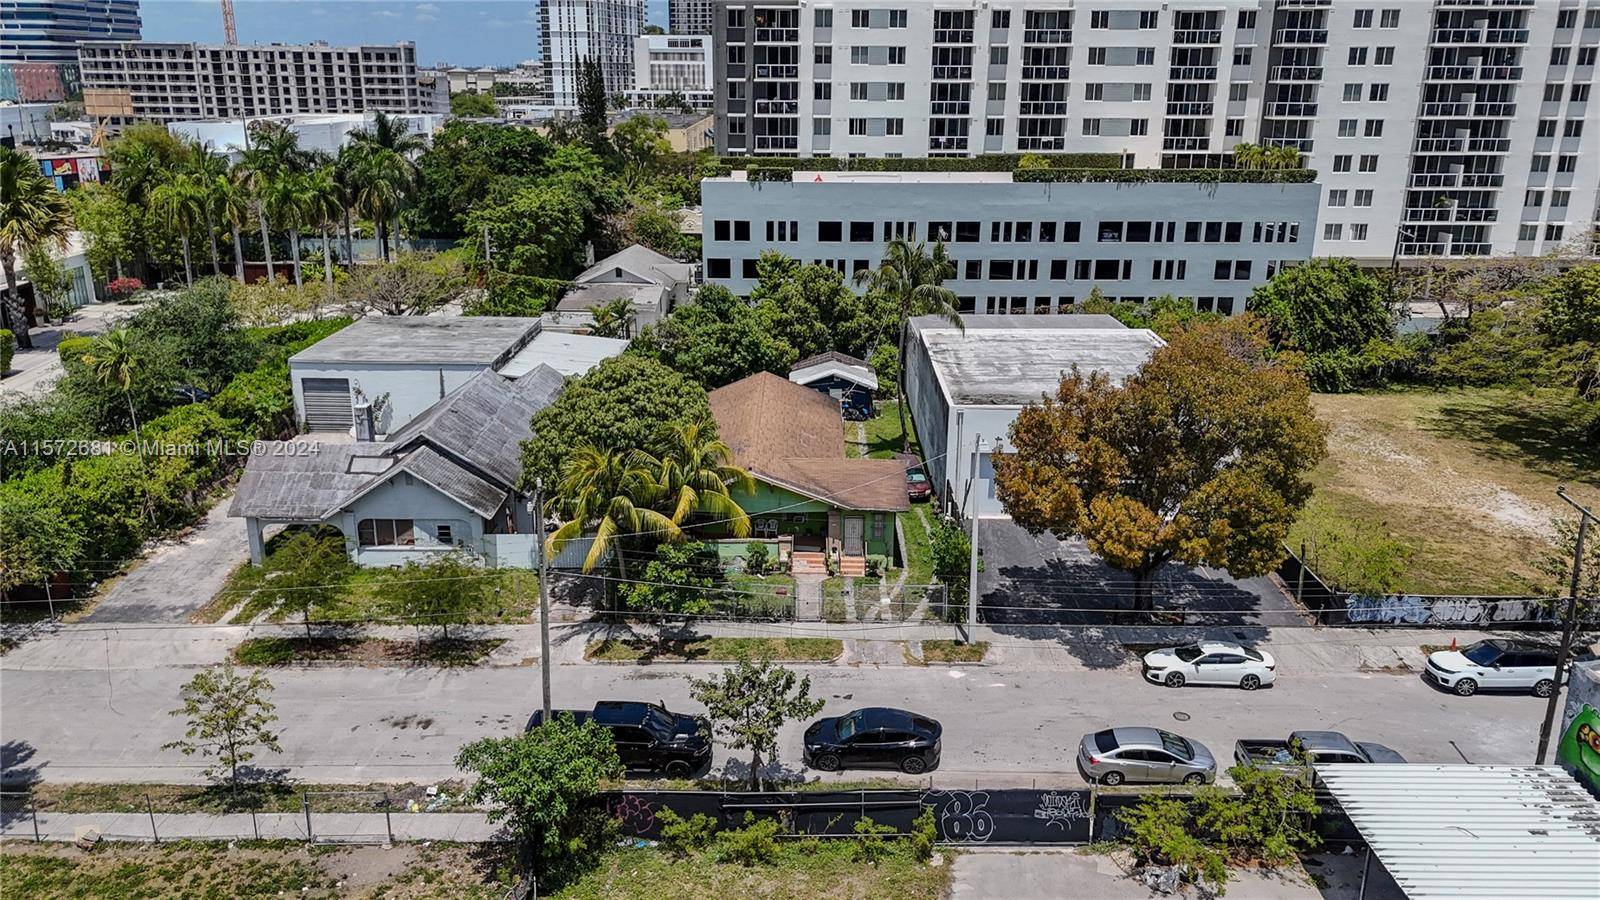 Located in fantastic Edgewater neighborhood, booming with development in all directions.